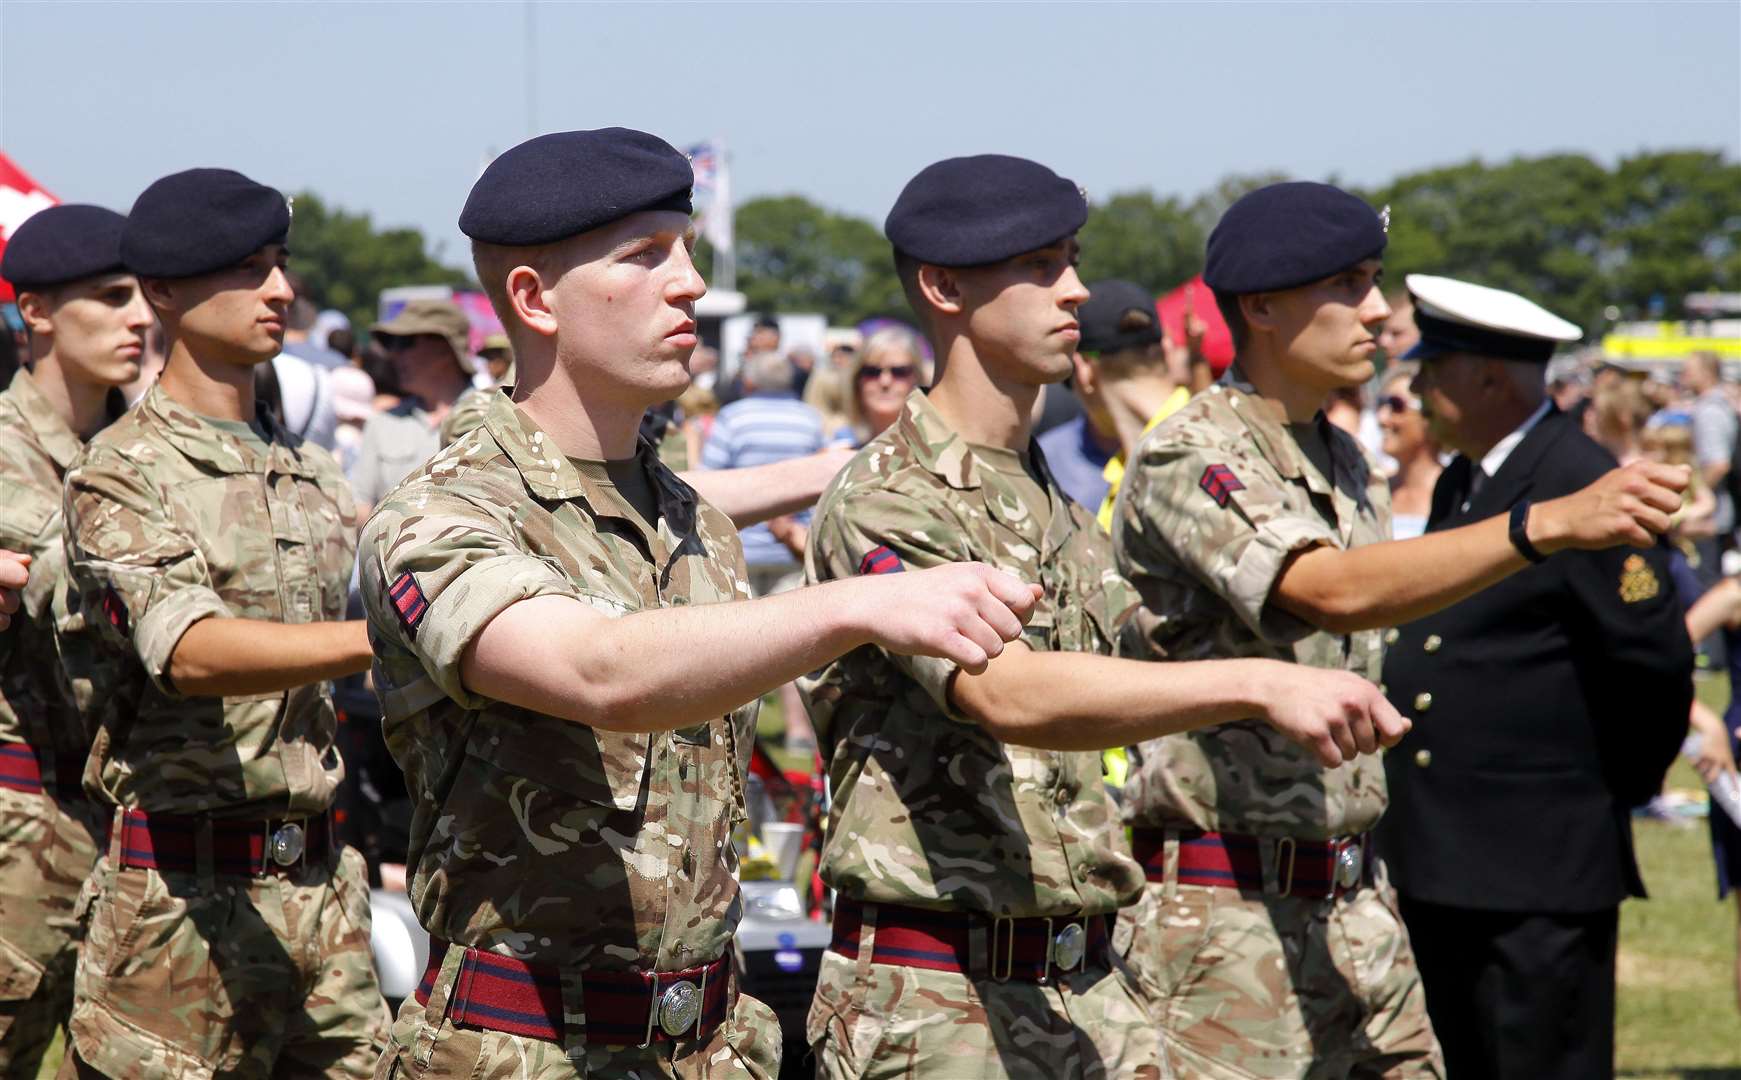 Armed Forces Day celebrations are taking place in Medway this weekend